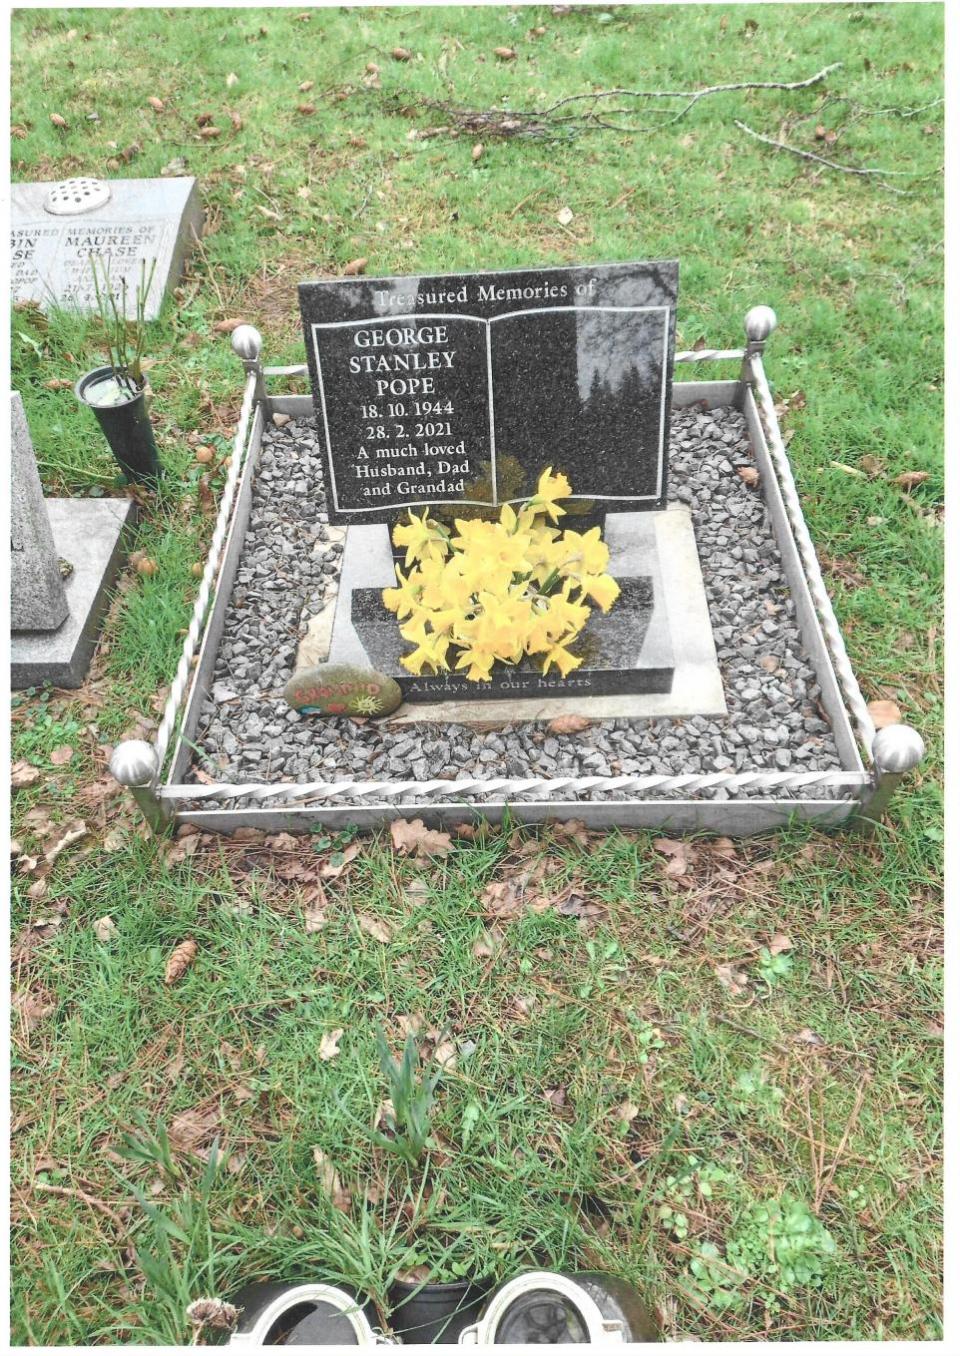 Eastern Daily Press: George Pope's grave at Creake Road Cemetery in Fakenham, with the surround which the town council have asked his son, Steve Pope, to remove